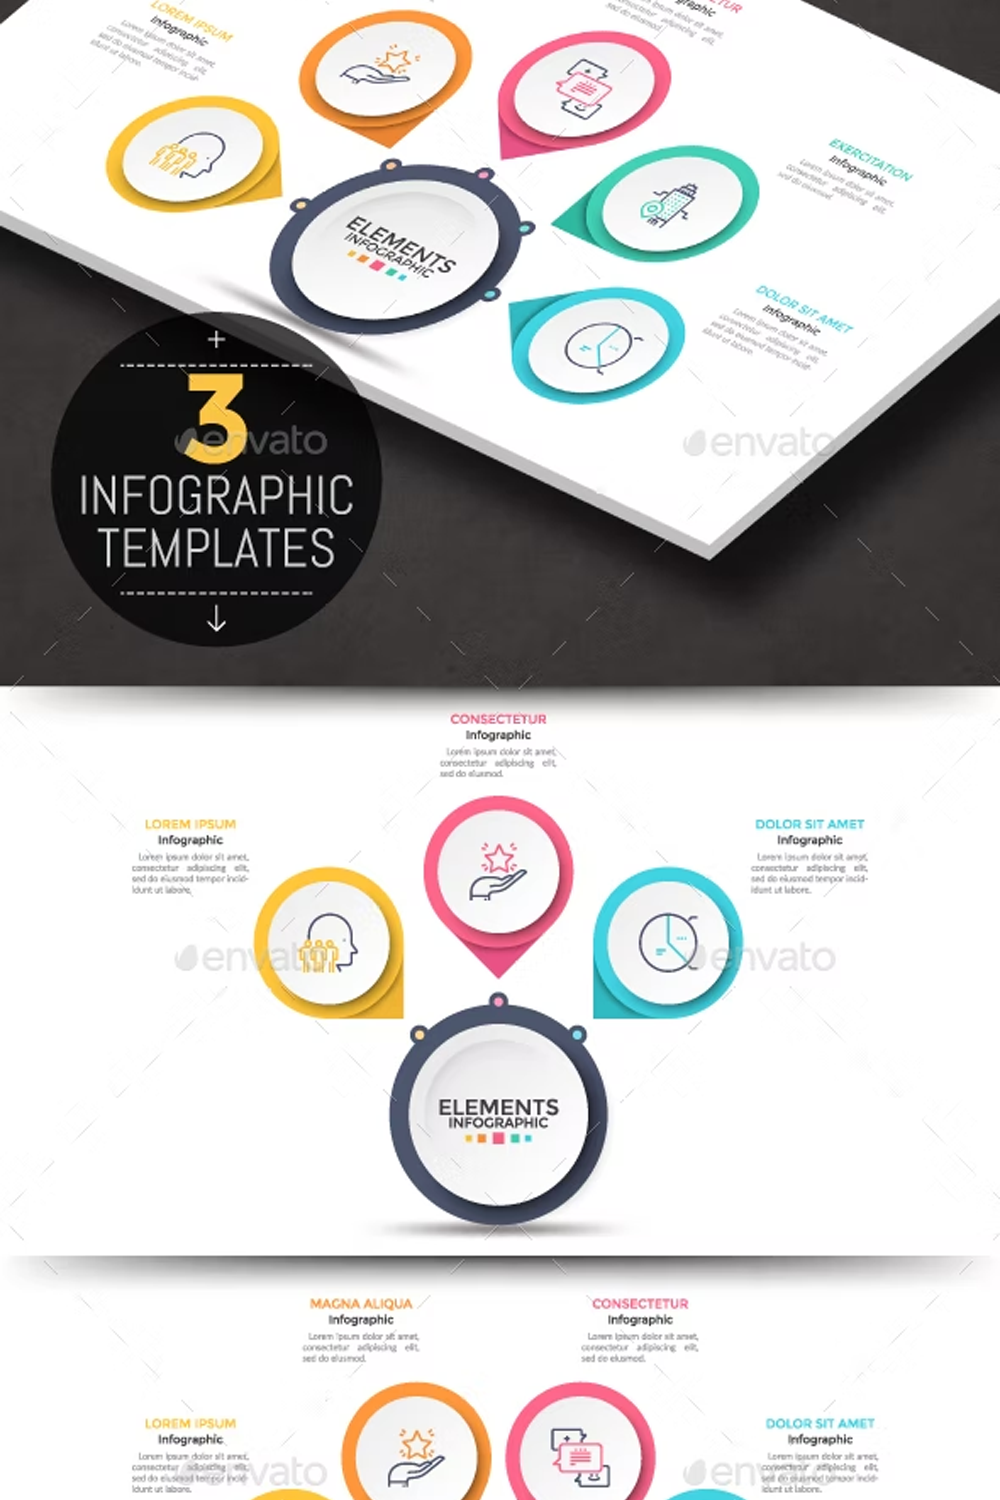 Illustrations circular infographic choice template 3 items of pinterest.